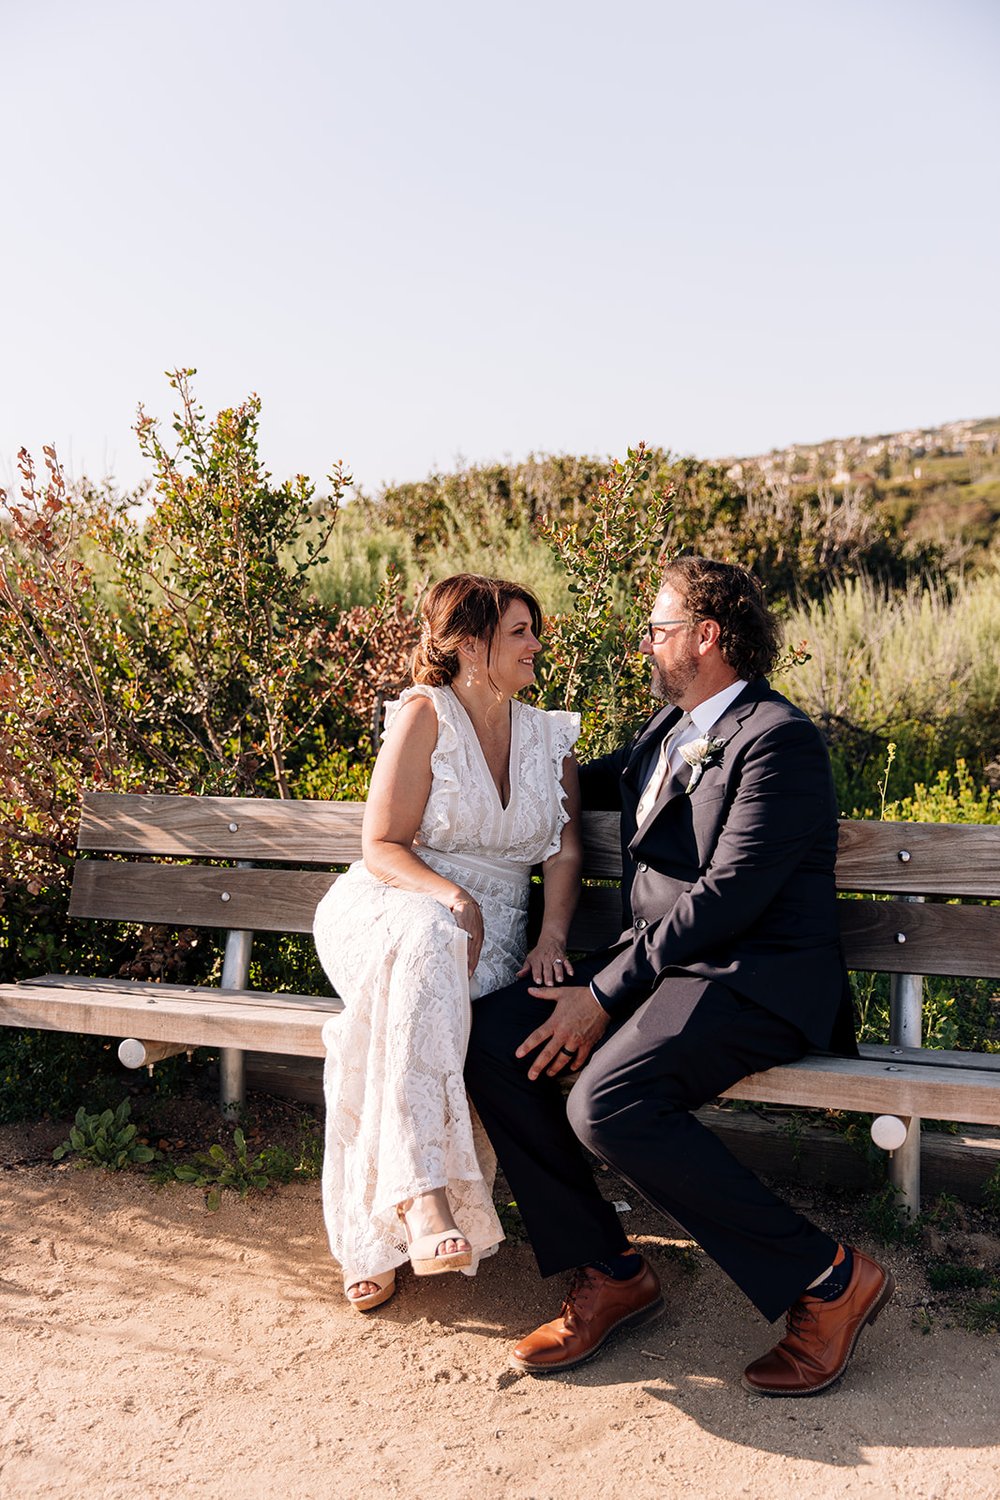 eloping at crystal cove in Laguna beach, eloping with your children, Orange County elopement photos, beach elopement photos, Laguna elopement photographer